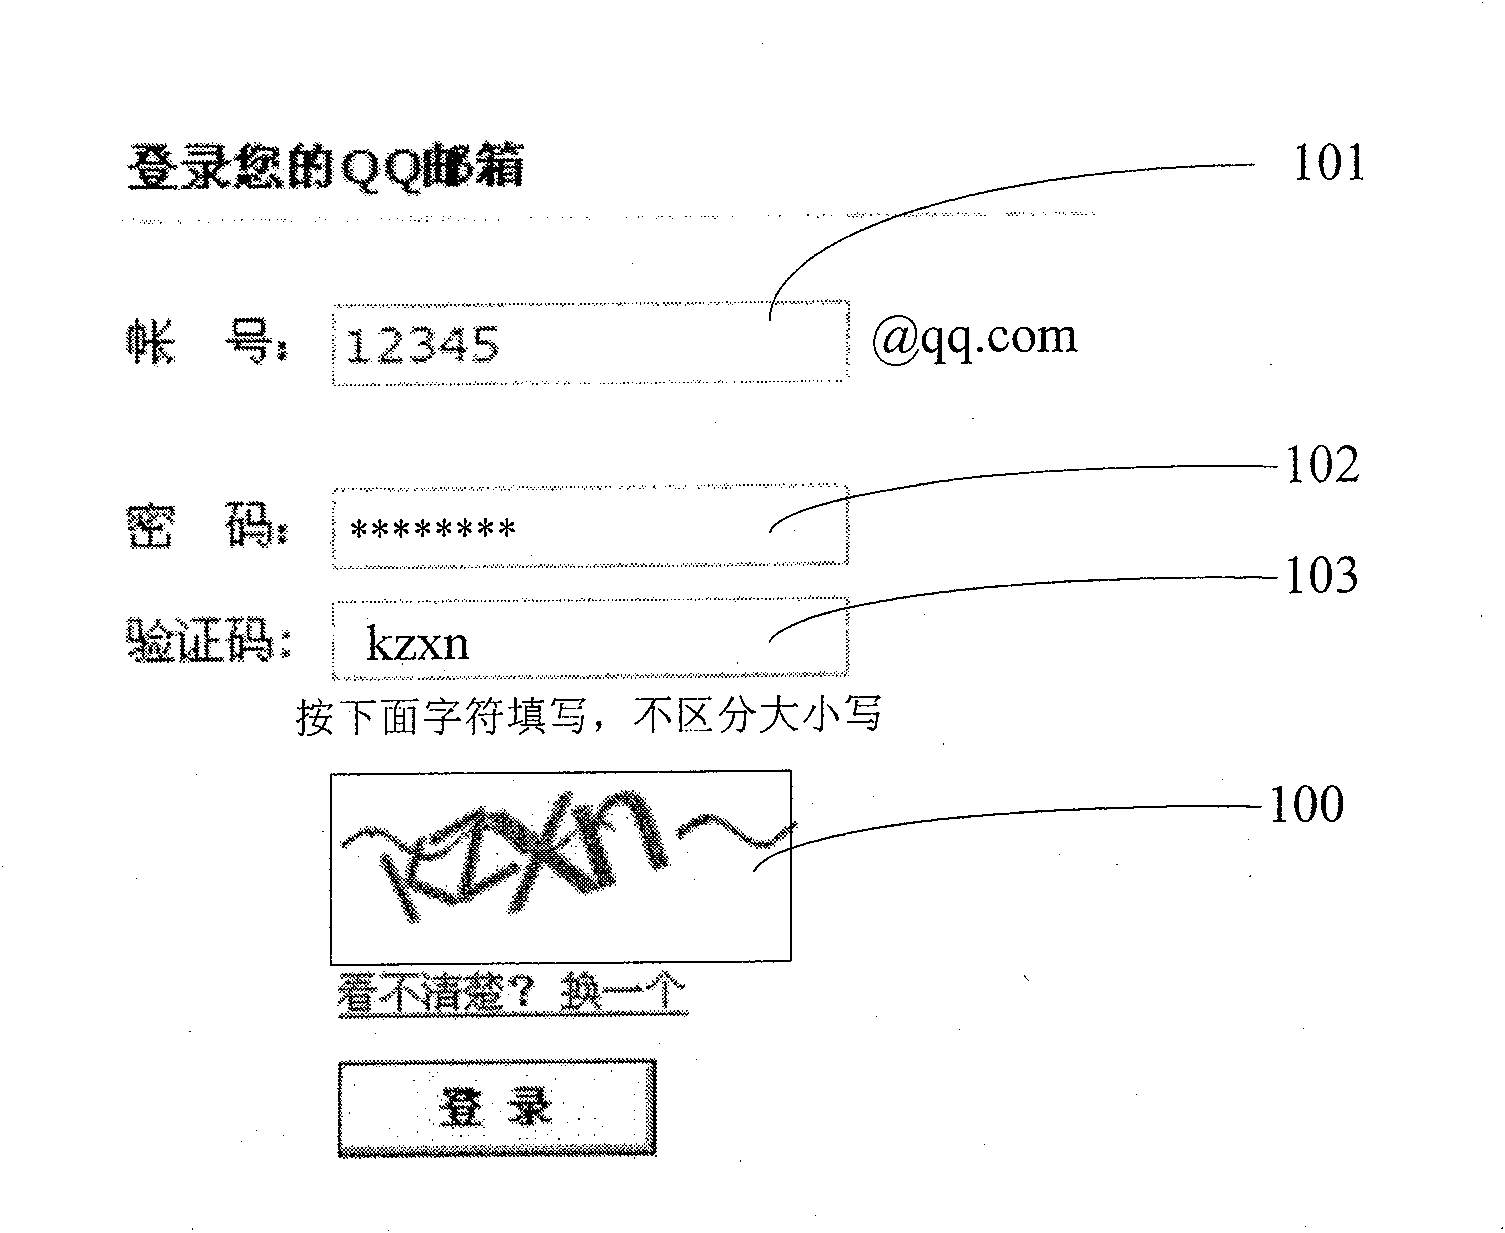 Image content recognizing method and recognition system